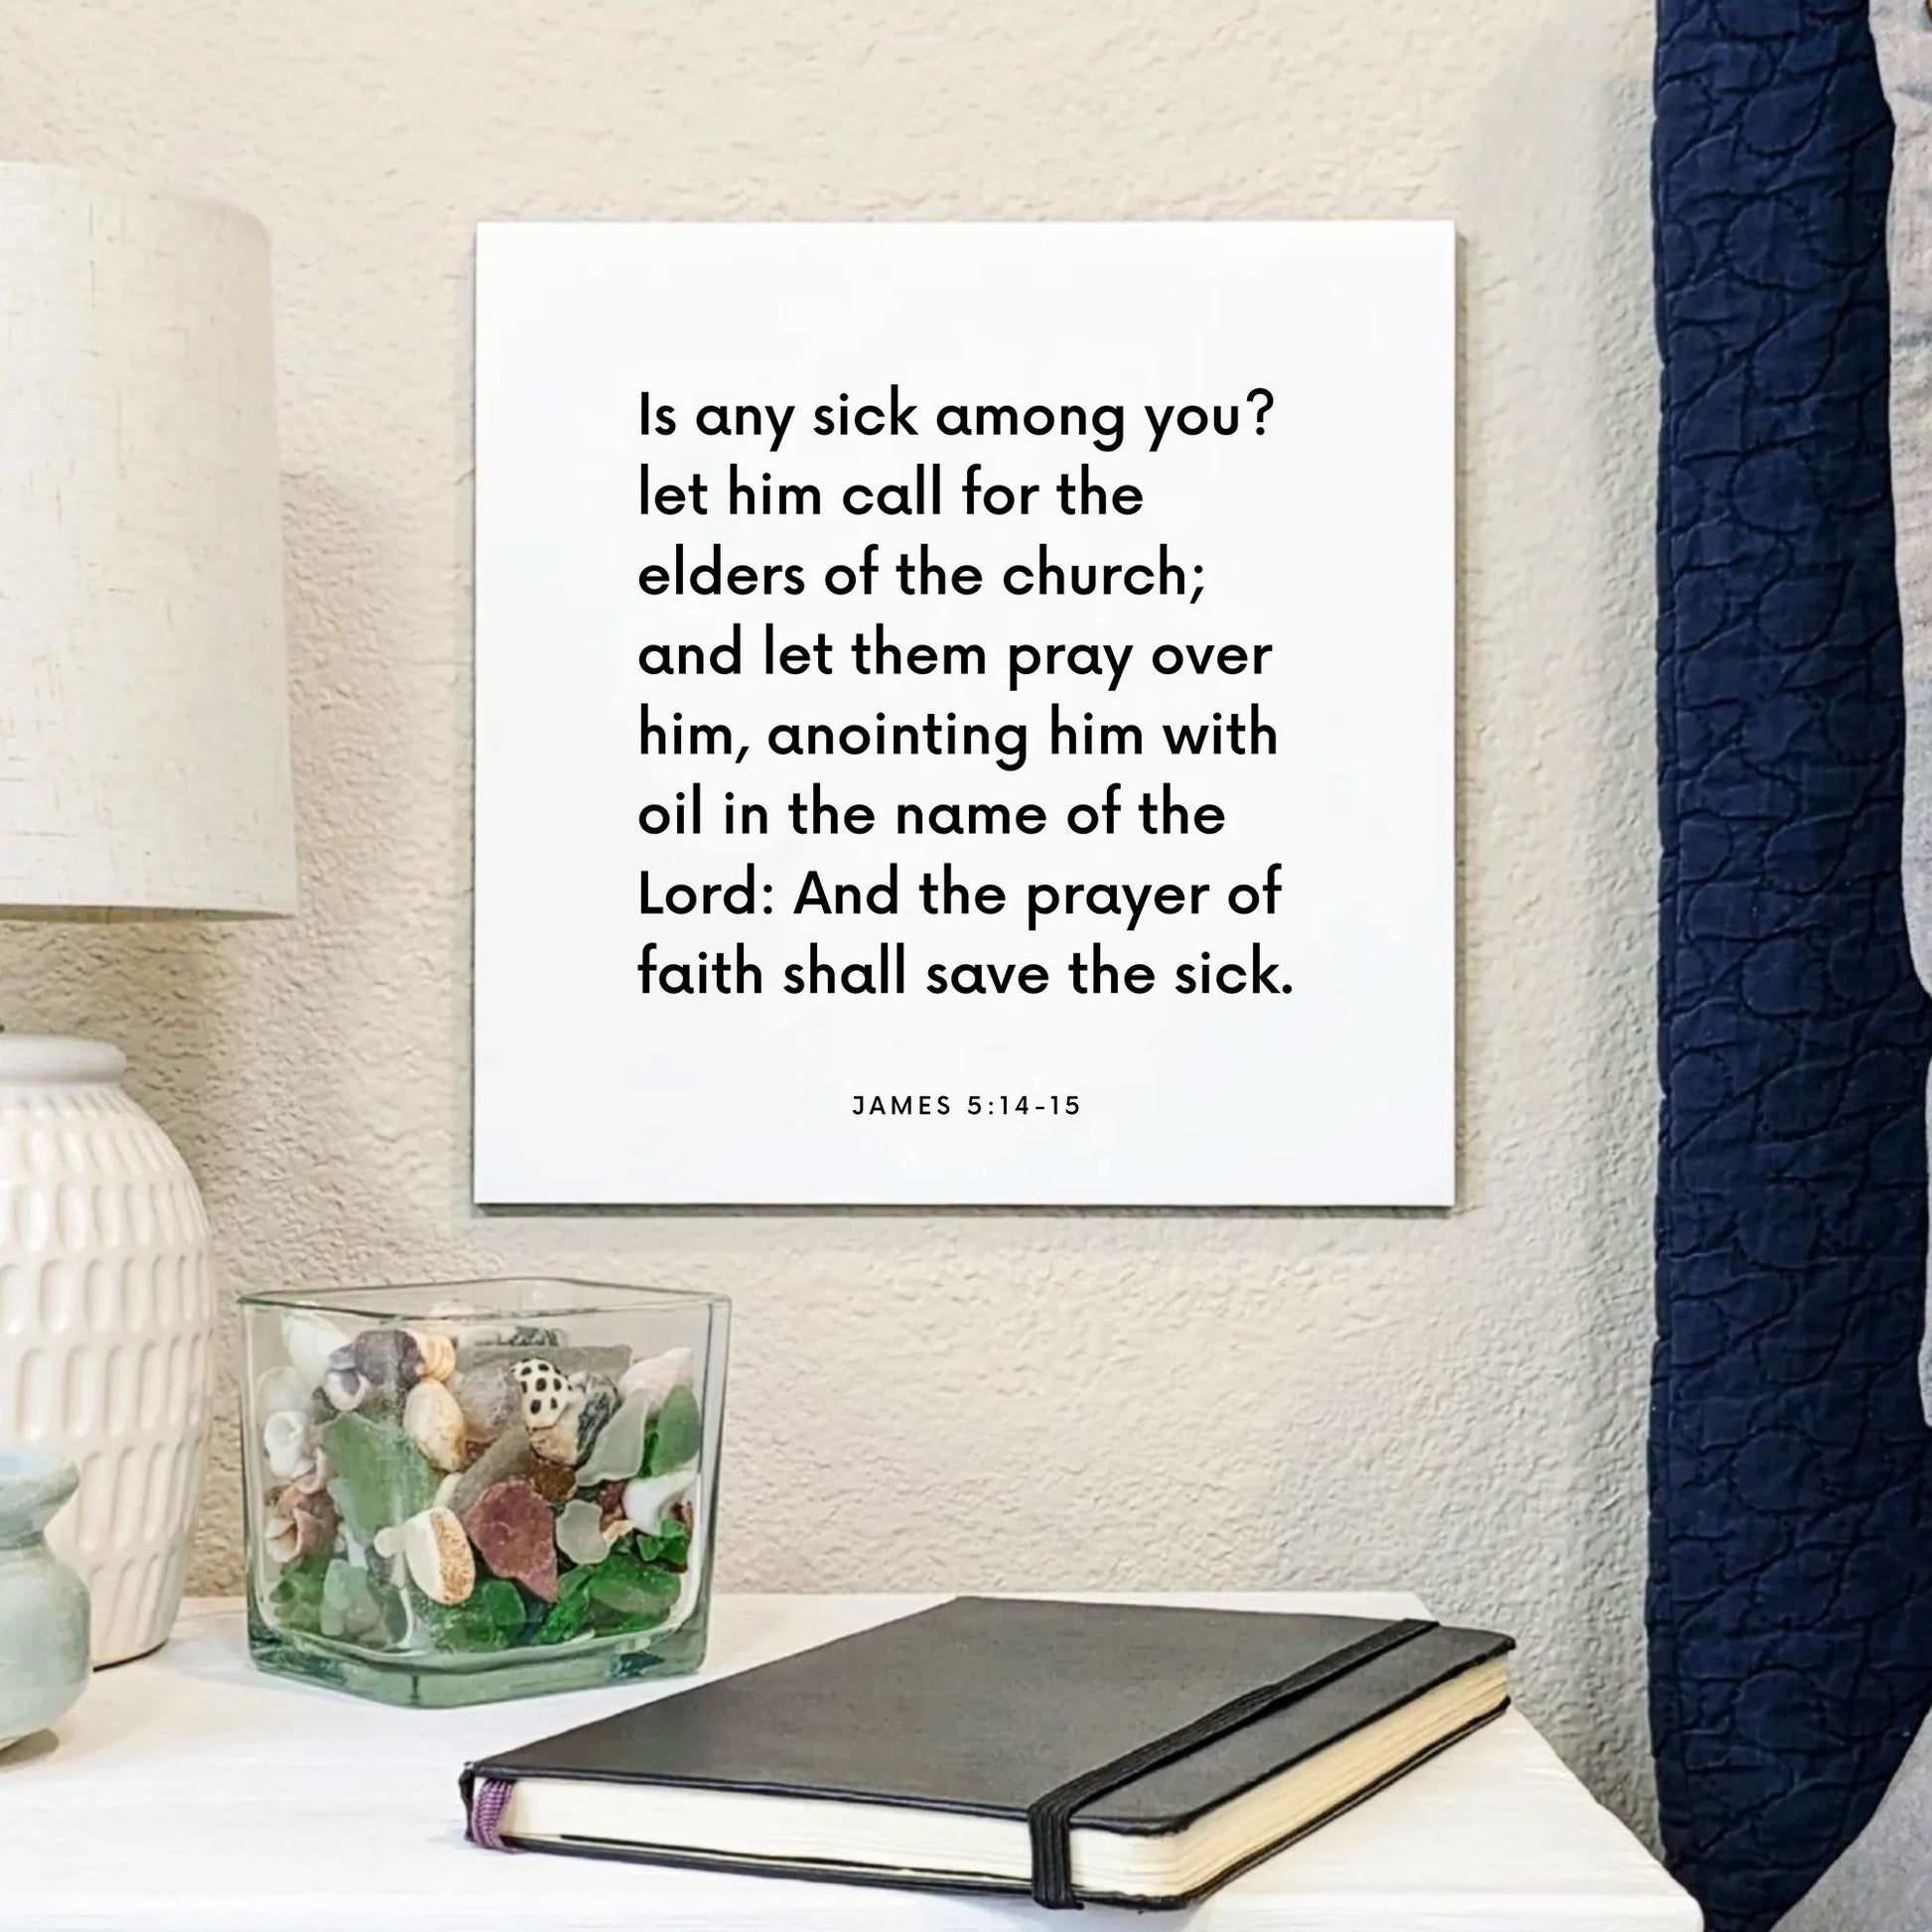 Bedside mouting of the scripture tile for James 5:14-15 - "Is any sick among you? let him call for the elders"